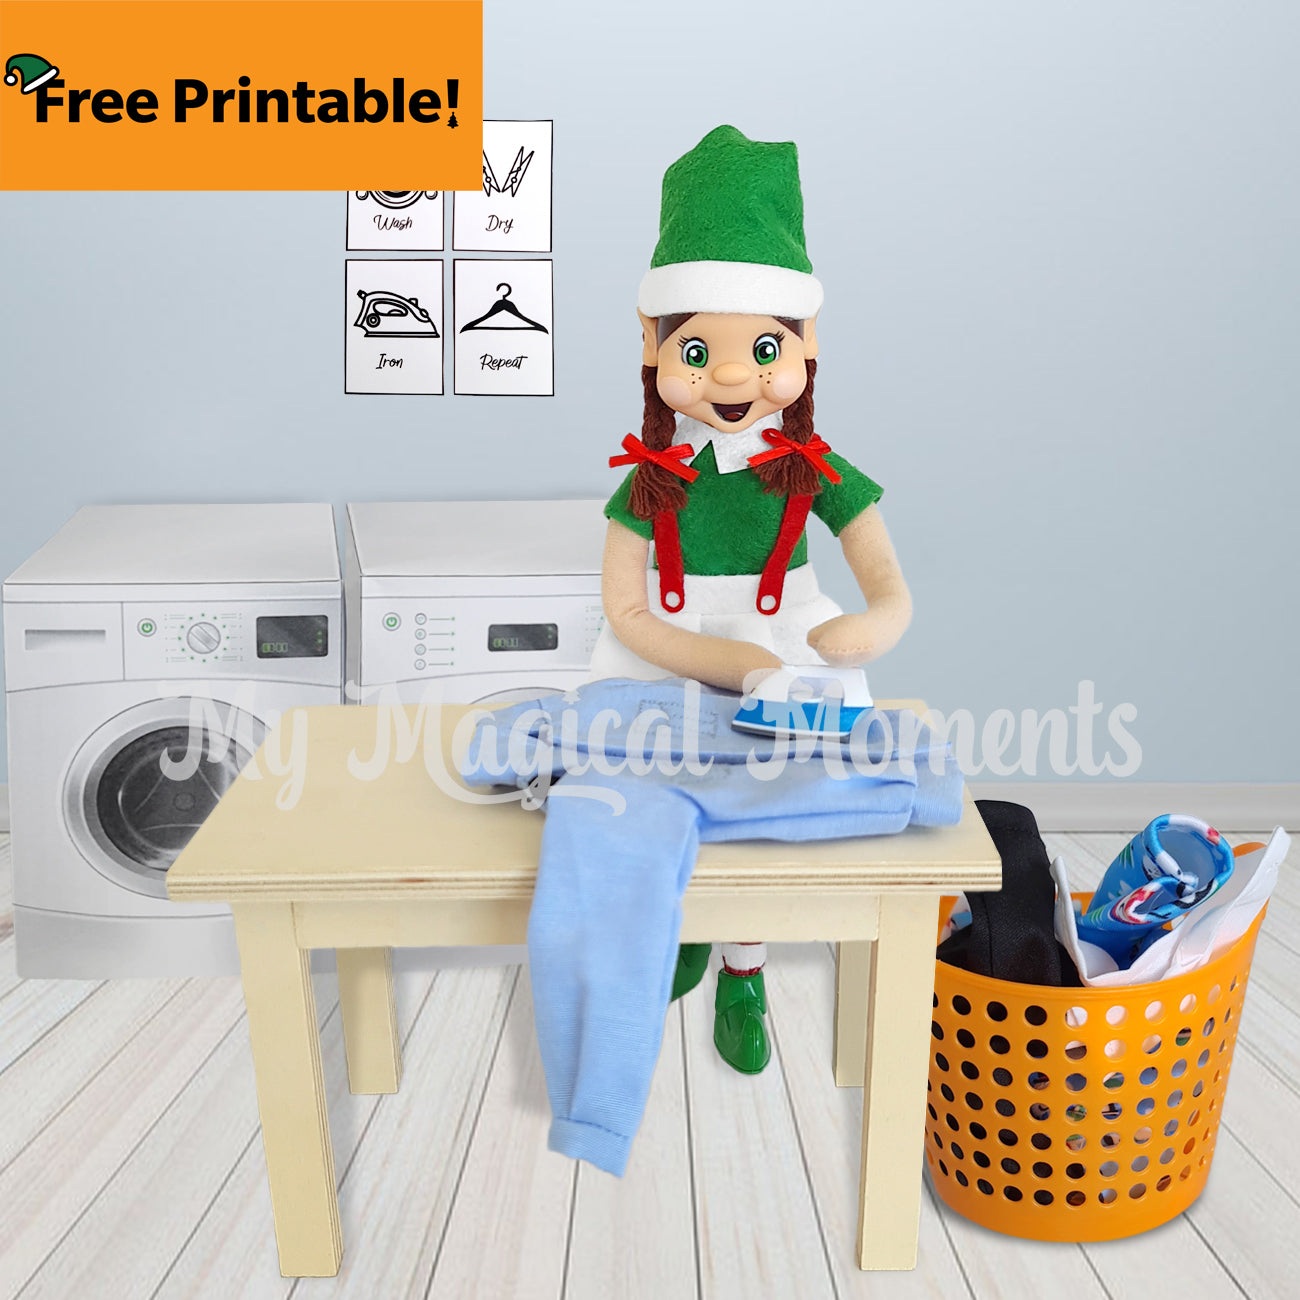 Free printable laundry elf scene. With miniature washing props such as an iron and clothing